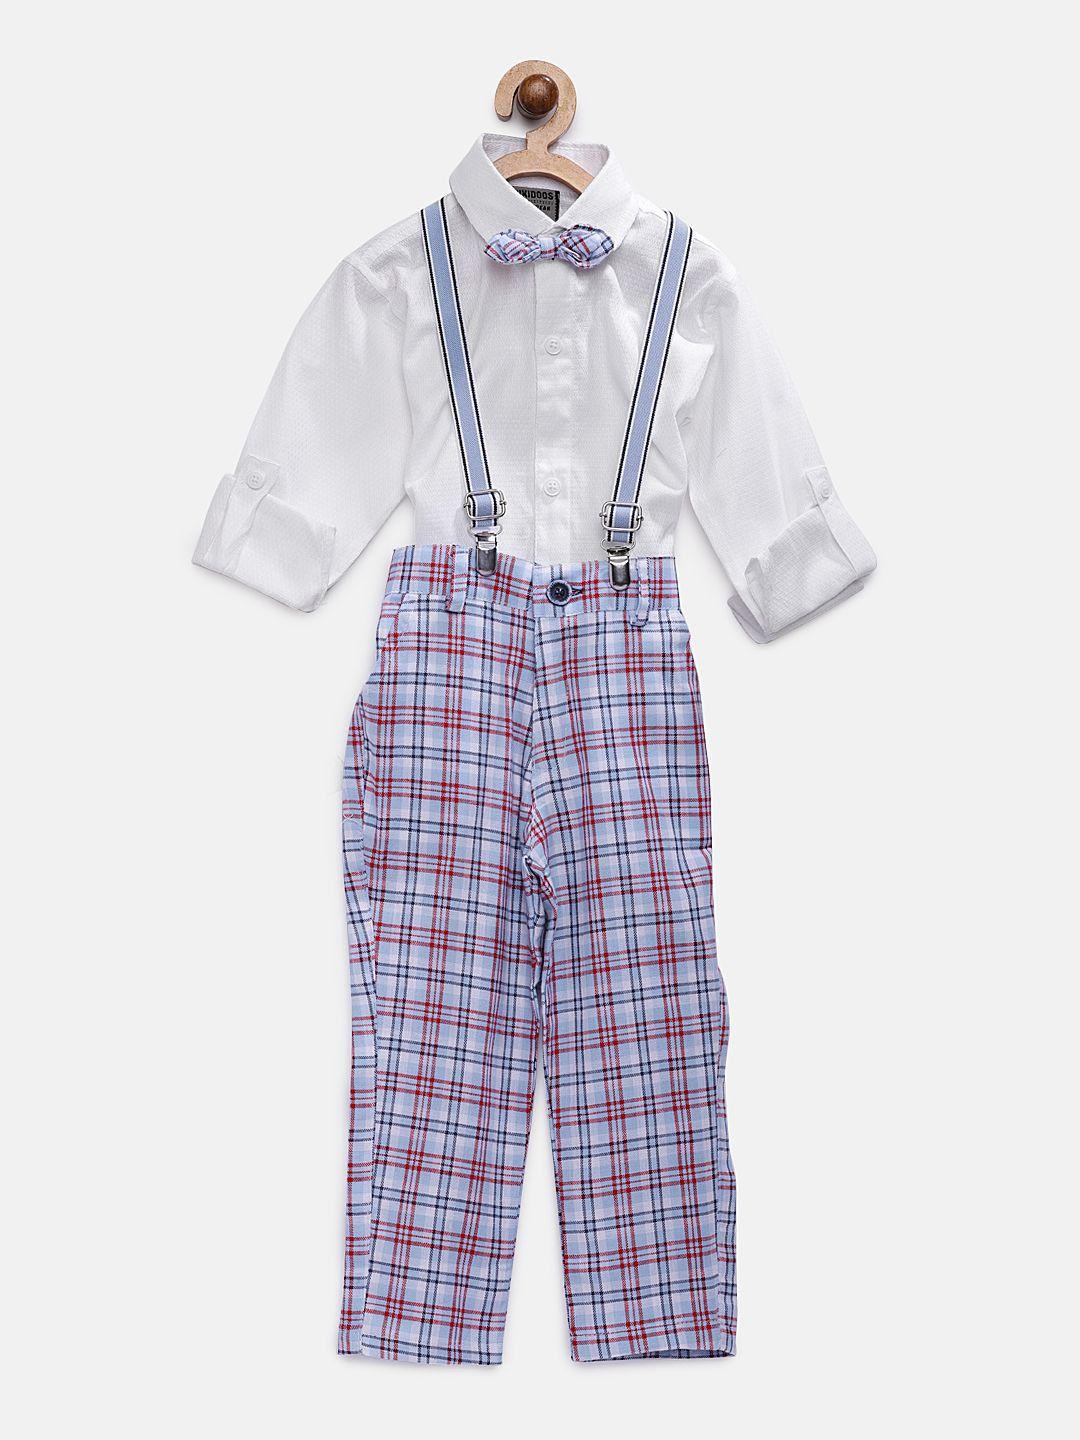 rikidoos boys white & blue solid shirt with trousers